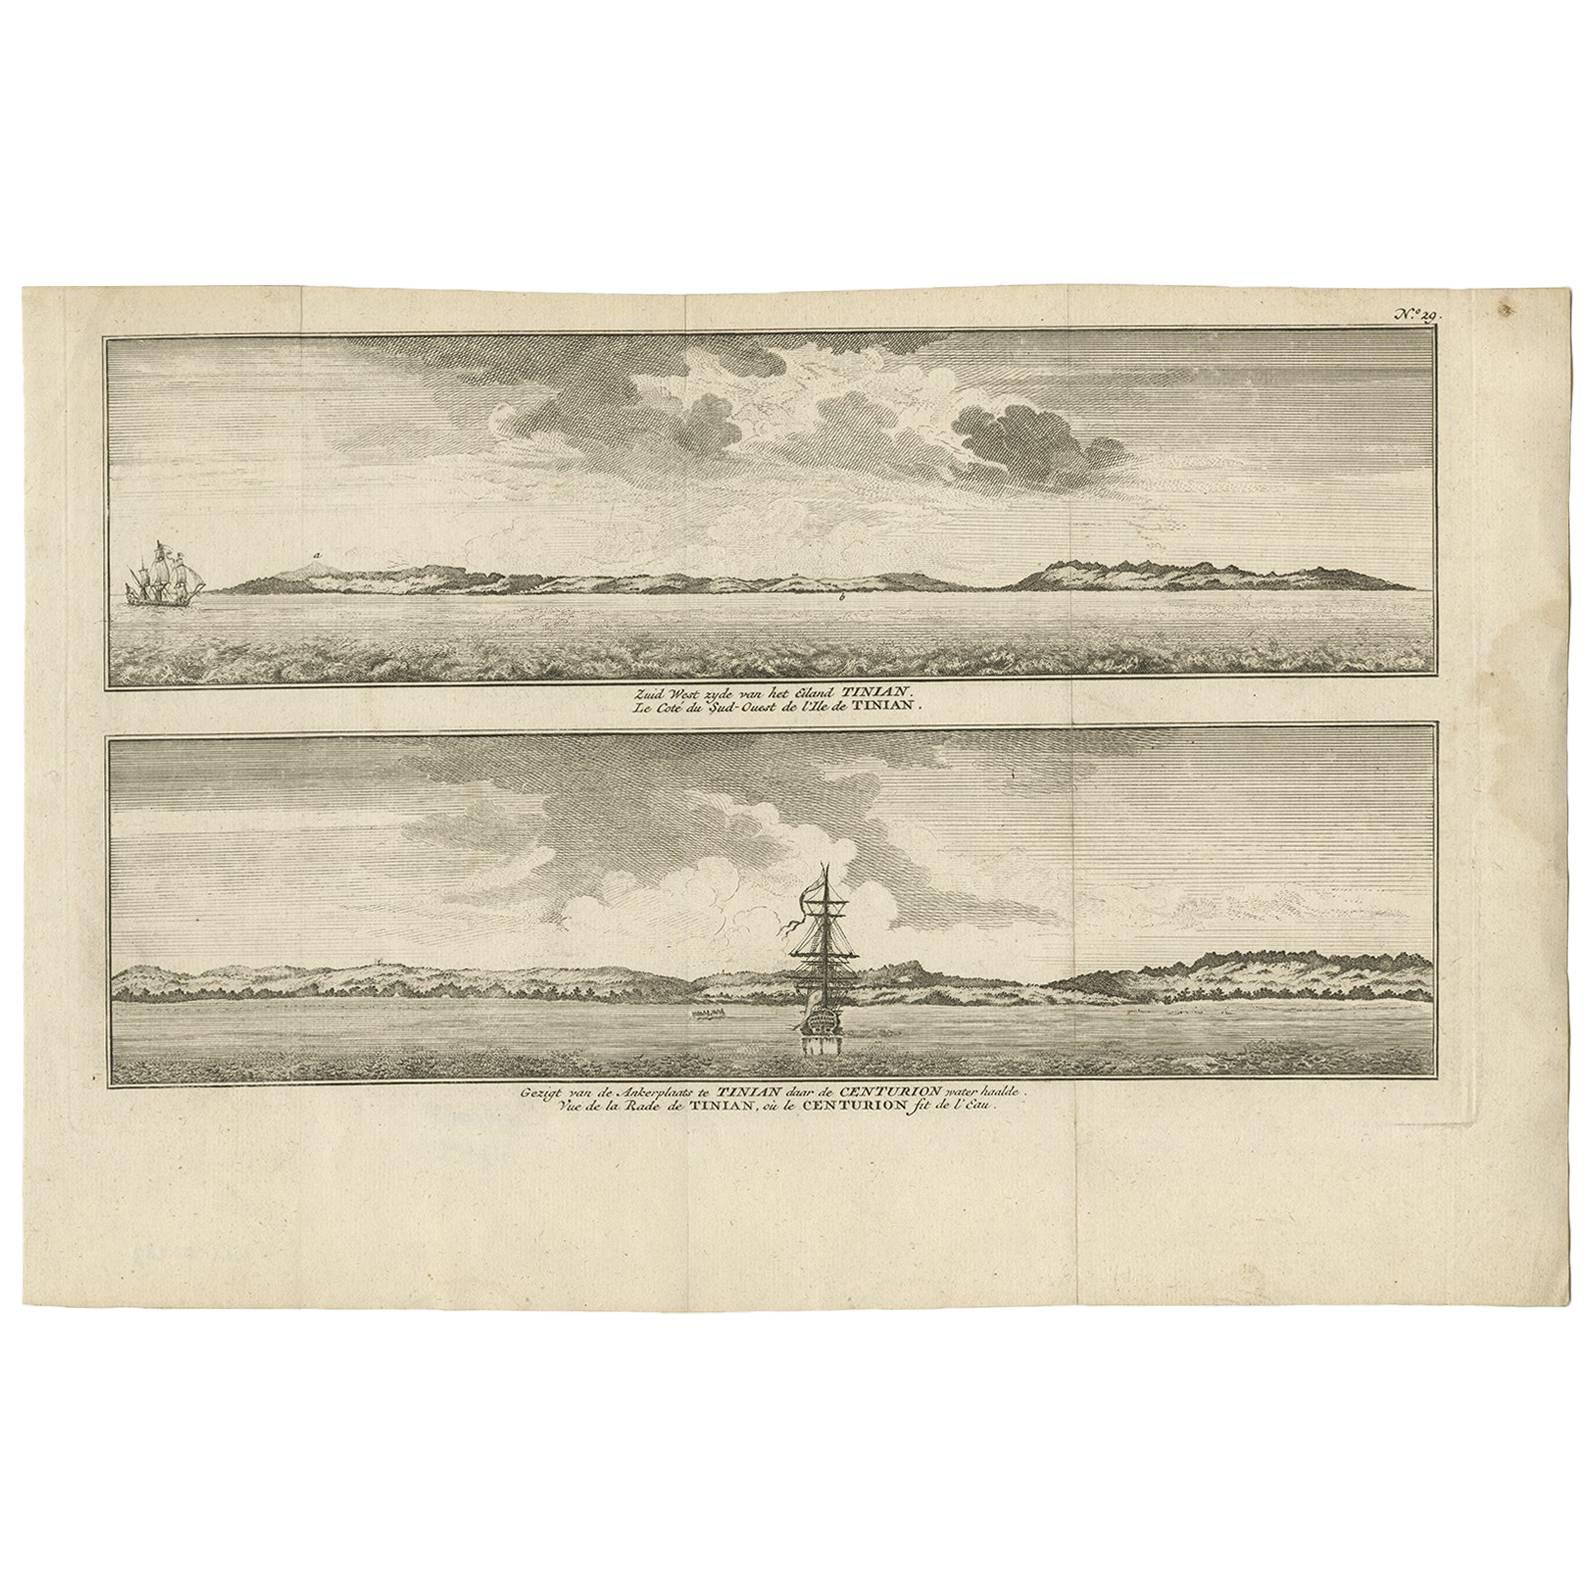 Antique Print with views of Tinian Island by Anson (c.1760)